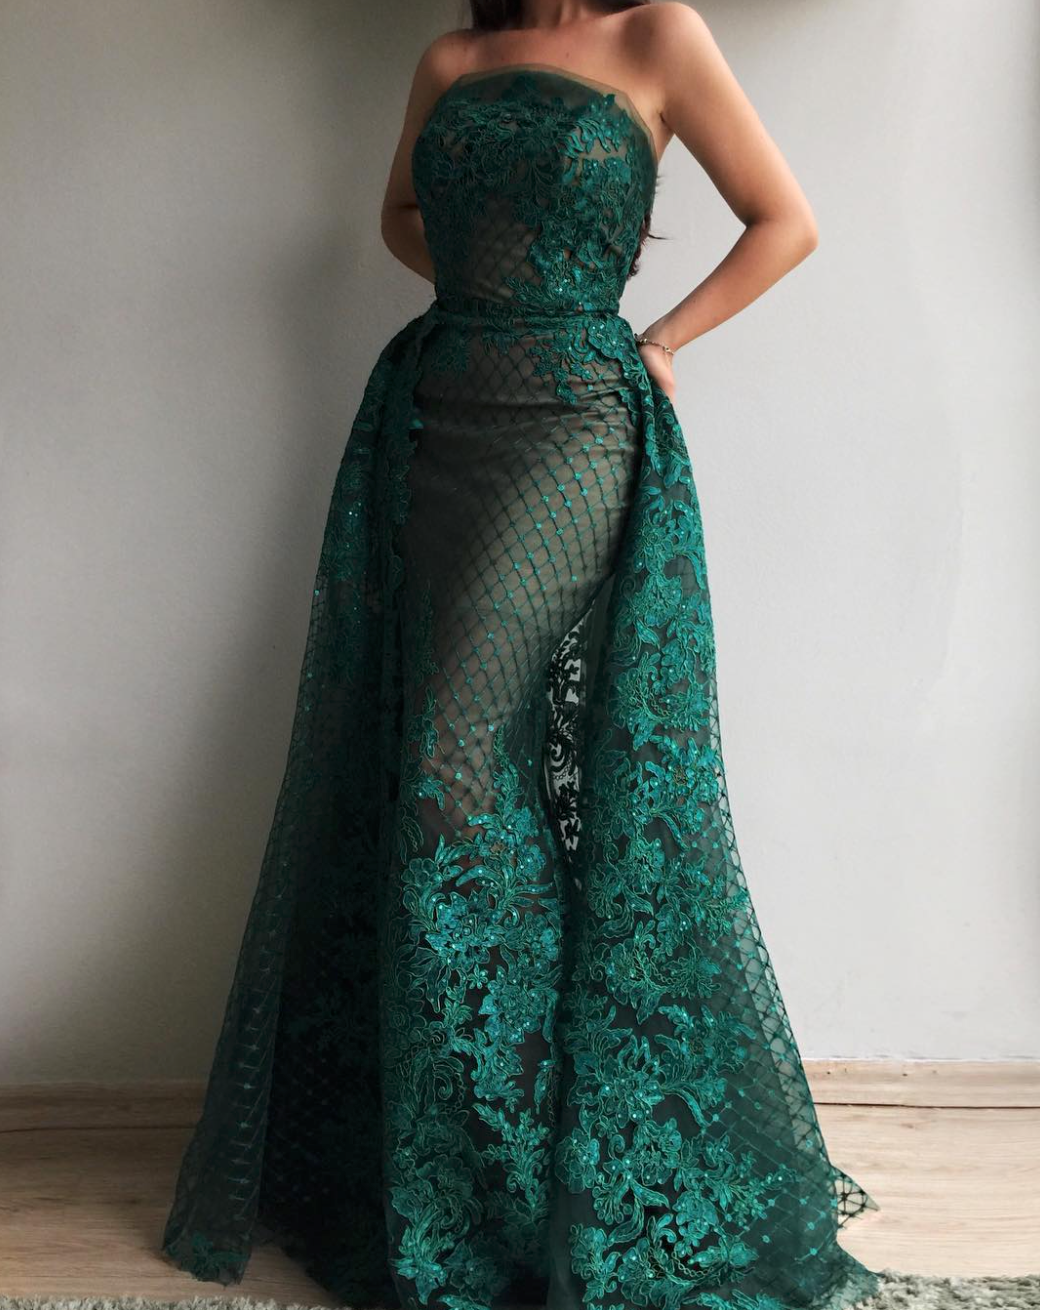 Green overskirt dress with no sleeves and lace